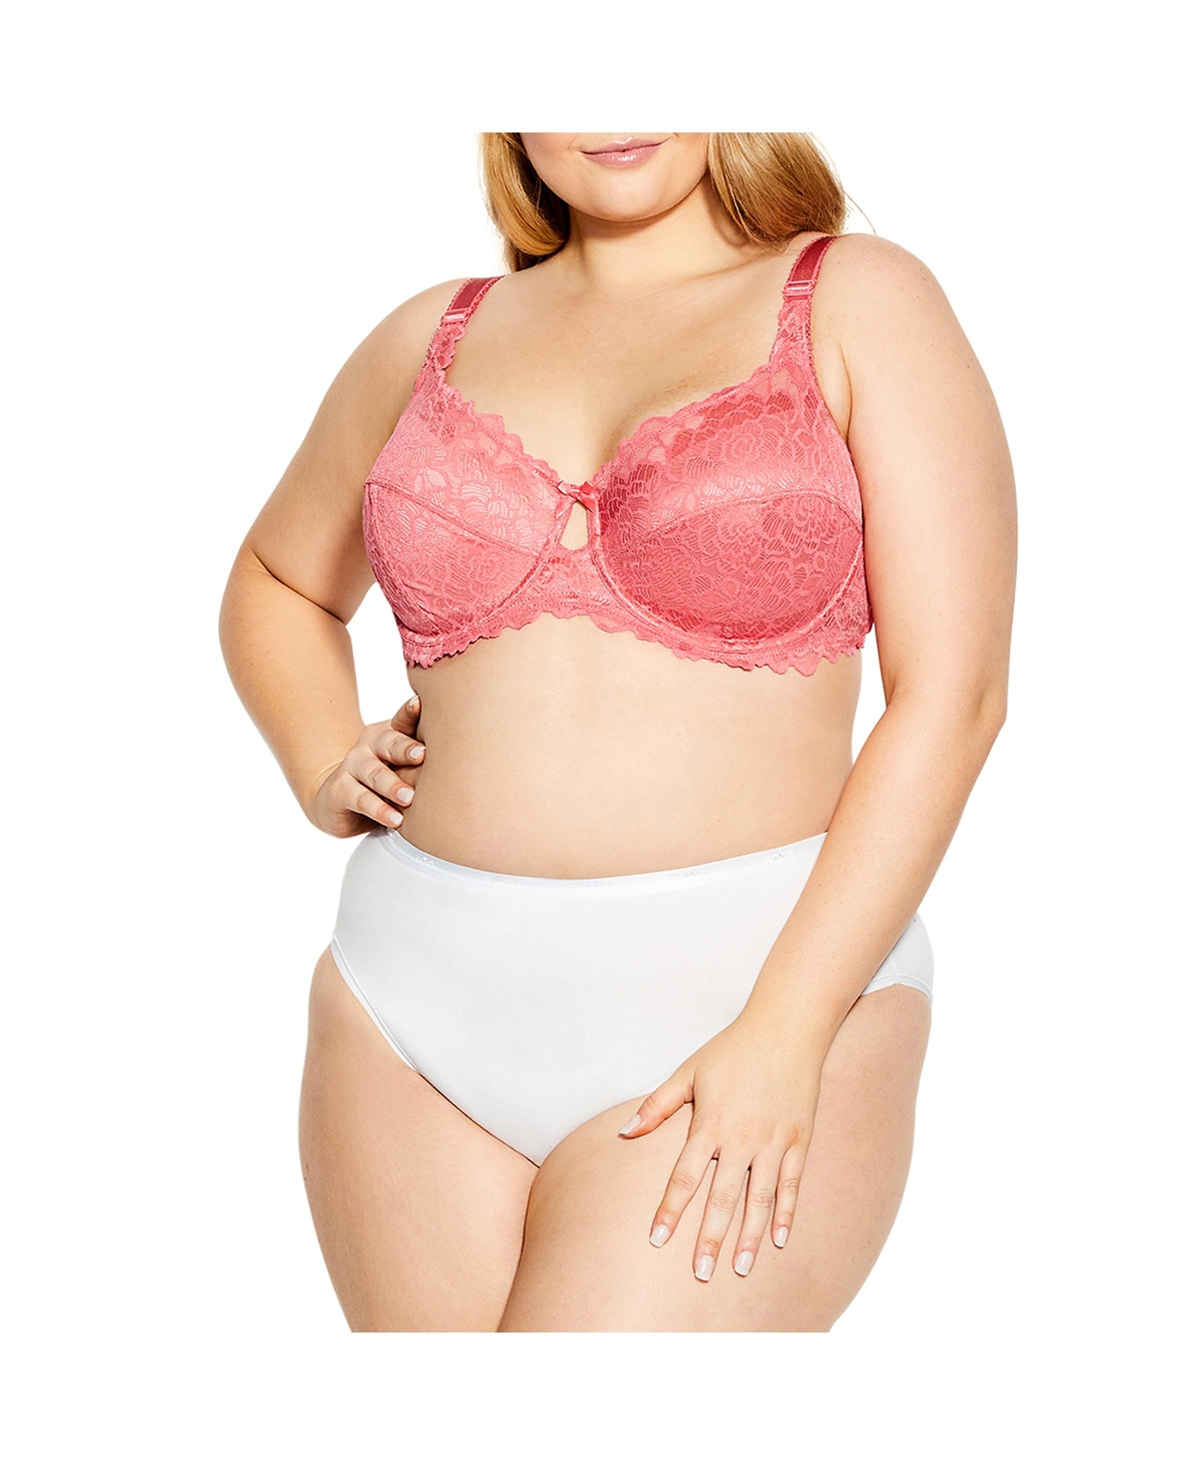 Women's Knitted Lace Soft Cup Bra - Rapture rose